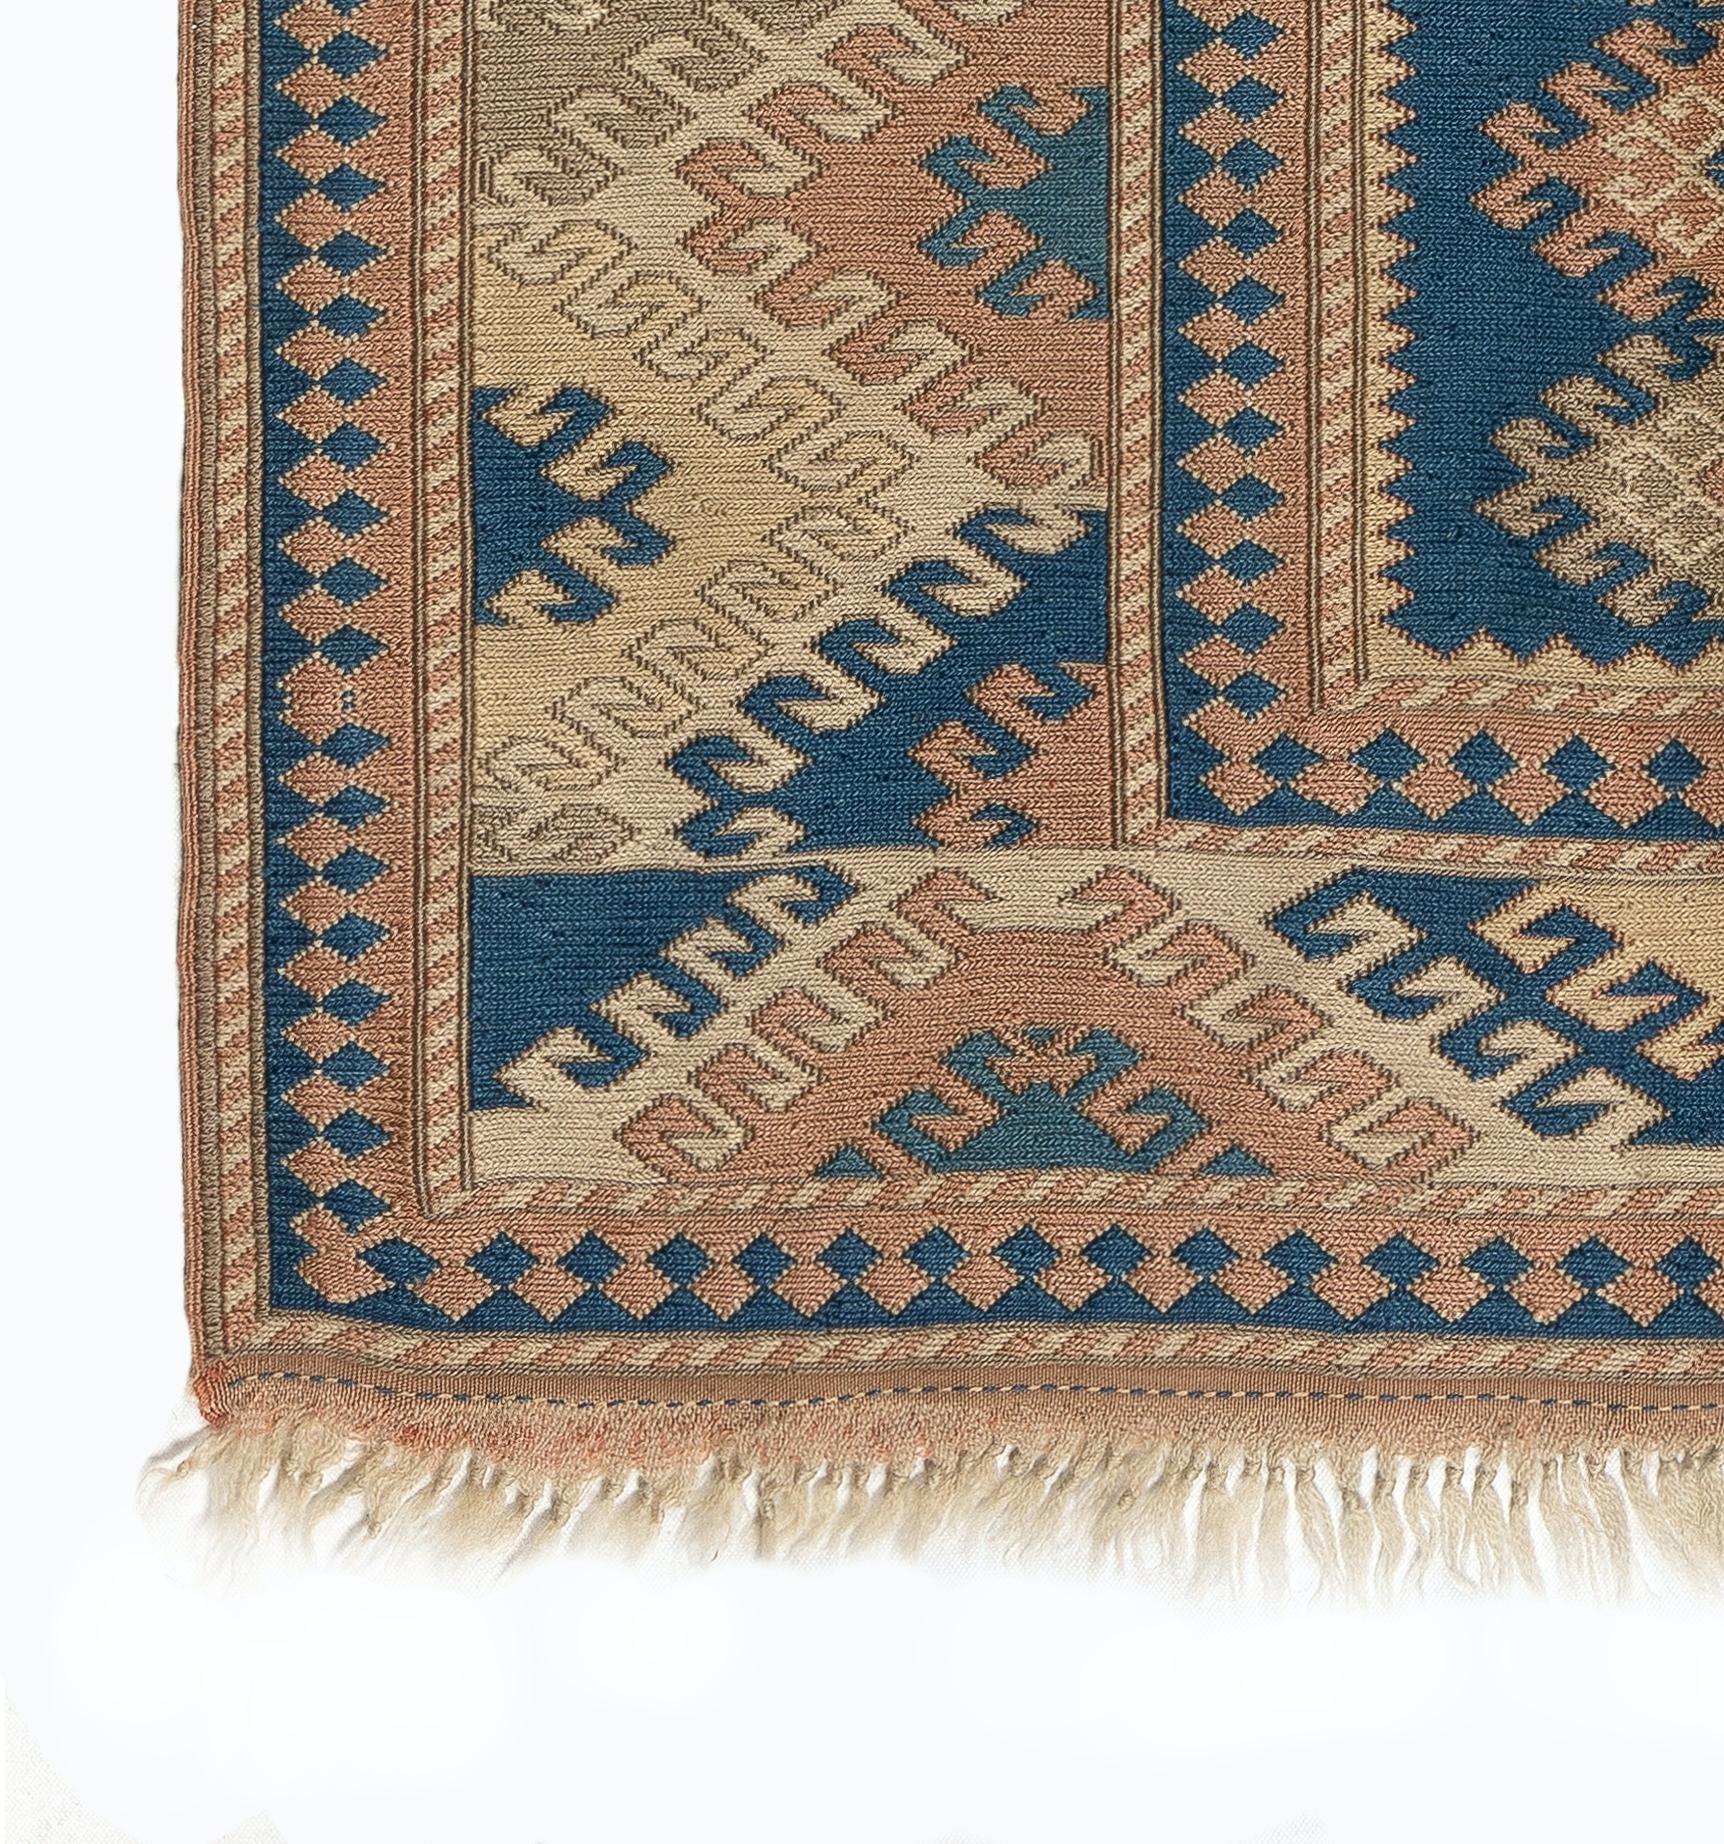 4x5.8 Ft Vintage Soumak Turkish Accent Rug with Wool Pile In Good Condition For Sale In Philadelphia, PA